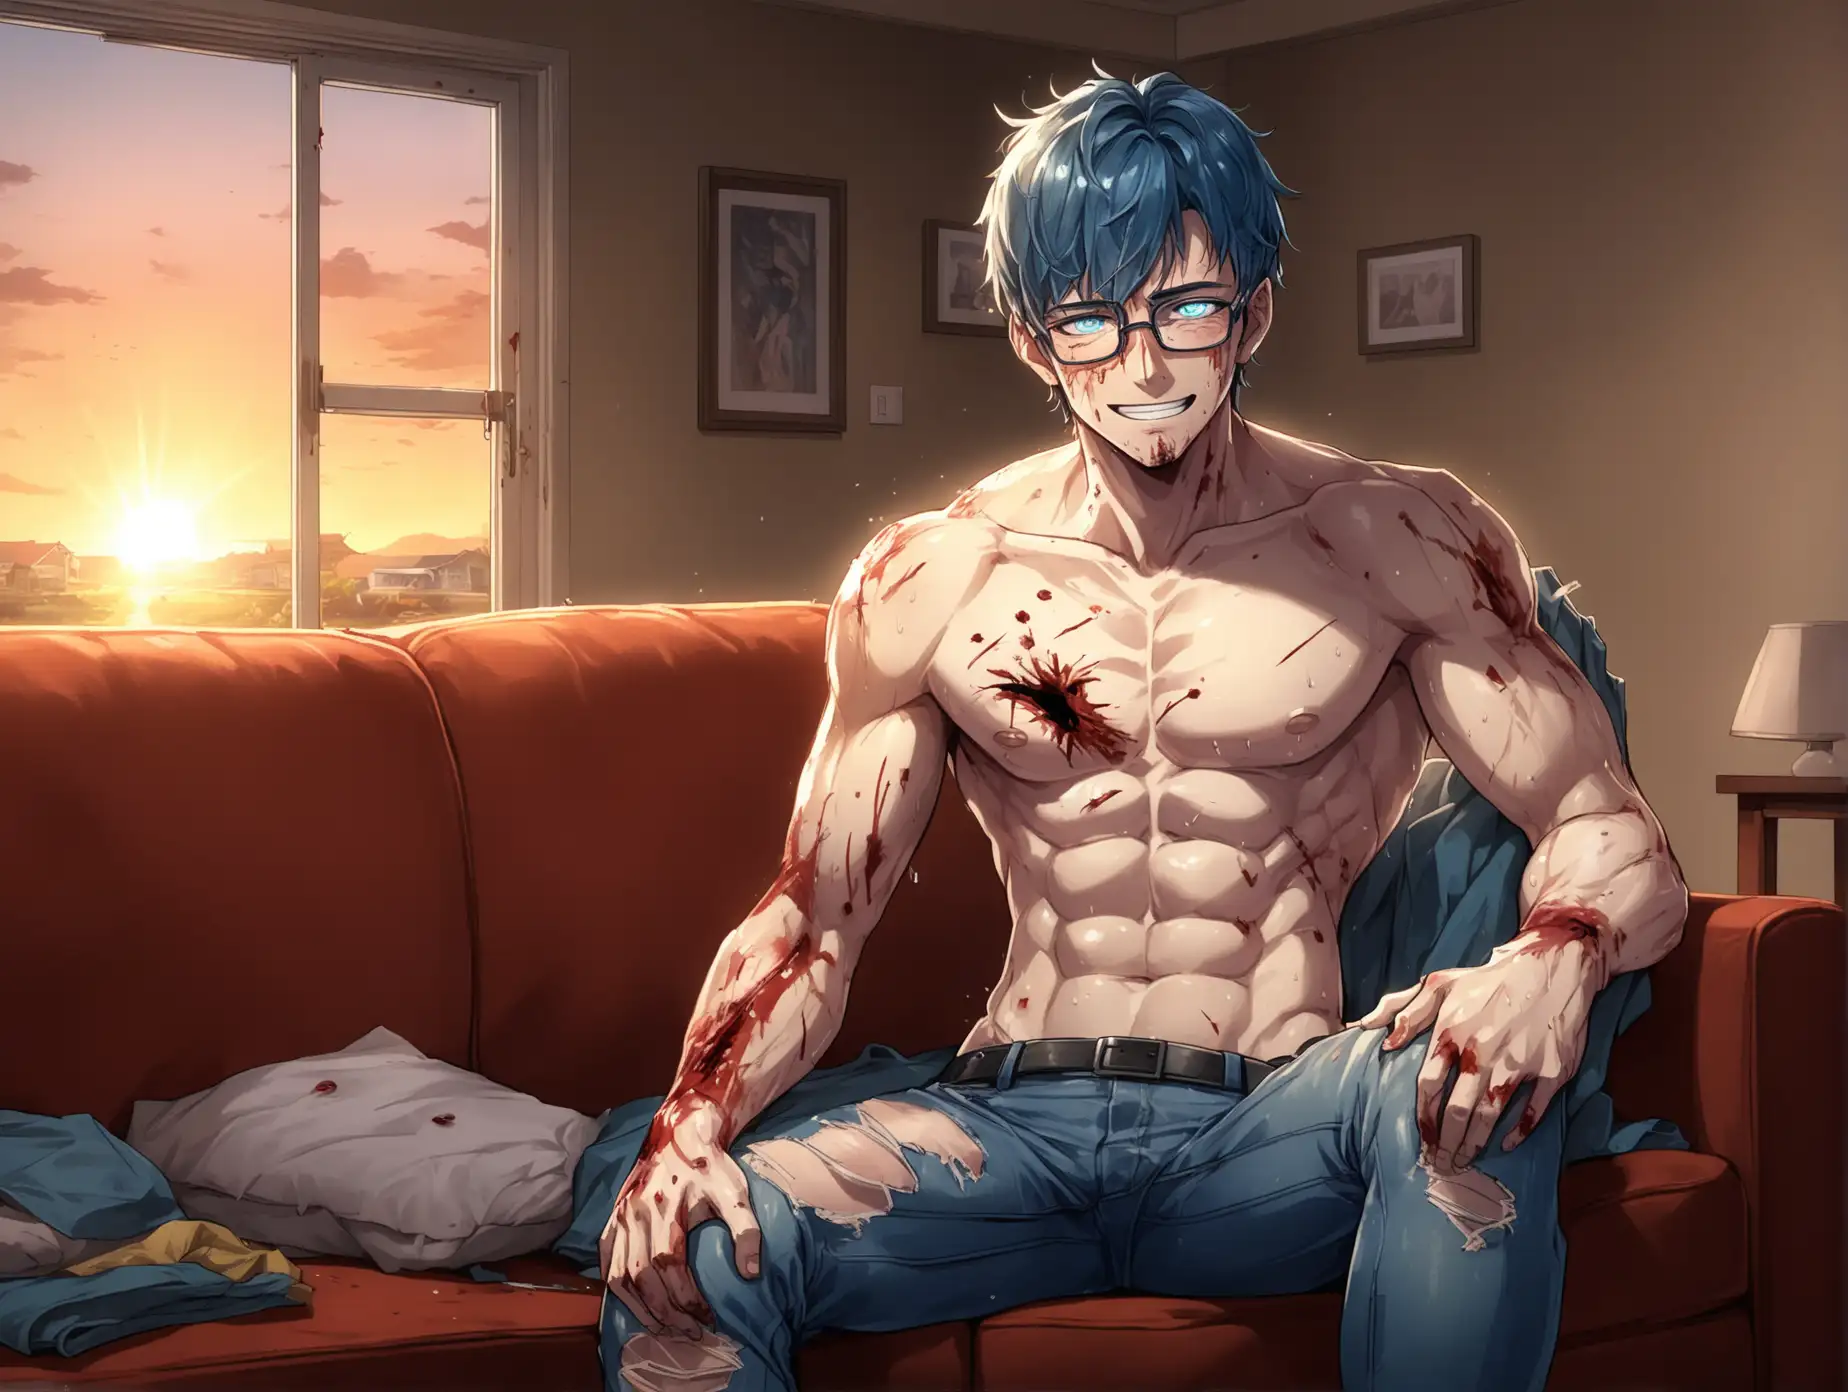 Create an image of a bloodied brave male android hunk in his 30s, who is shirtless, with a fainted smile on his handsome face, panting on his sofa, finally at home . He has short navy-blue hair, glowing aquamarine eyes and glasses. Signs of the exhausting battle are on his torn jeans, sweat drenched face and muscles. The injuries he suffered are evidence of how he was driven by his unwavering resolution to save his boyfriend. His expression mirrors his relief in knowing his love is safe. The warmth of the android hero greeting the viewer with open arms and sunset shining into the house could make anyone crying happy tears